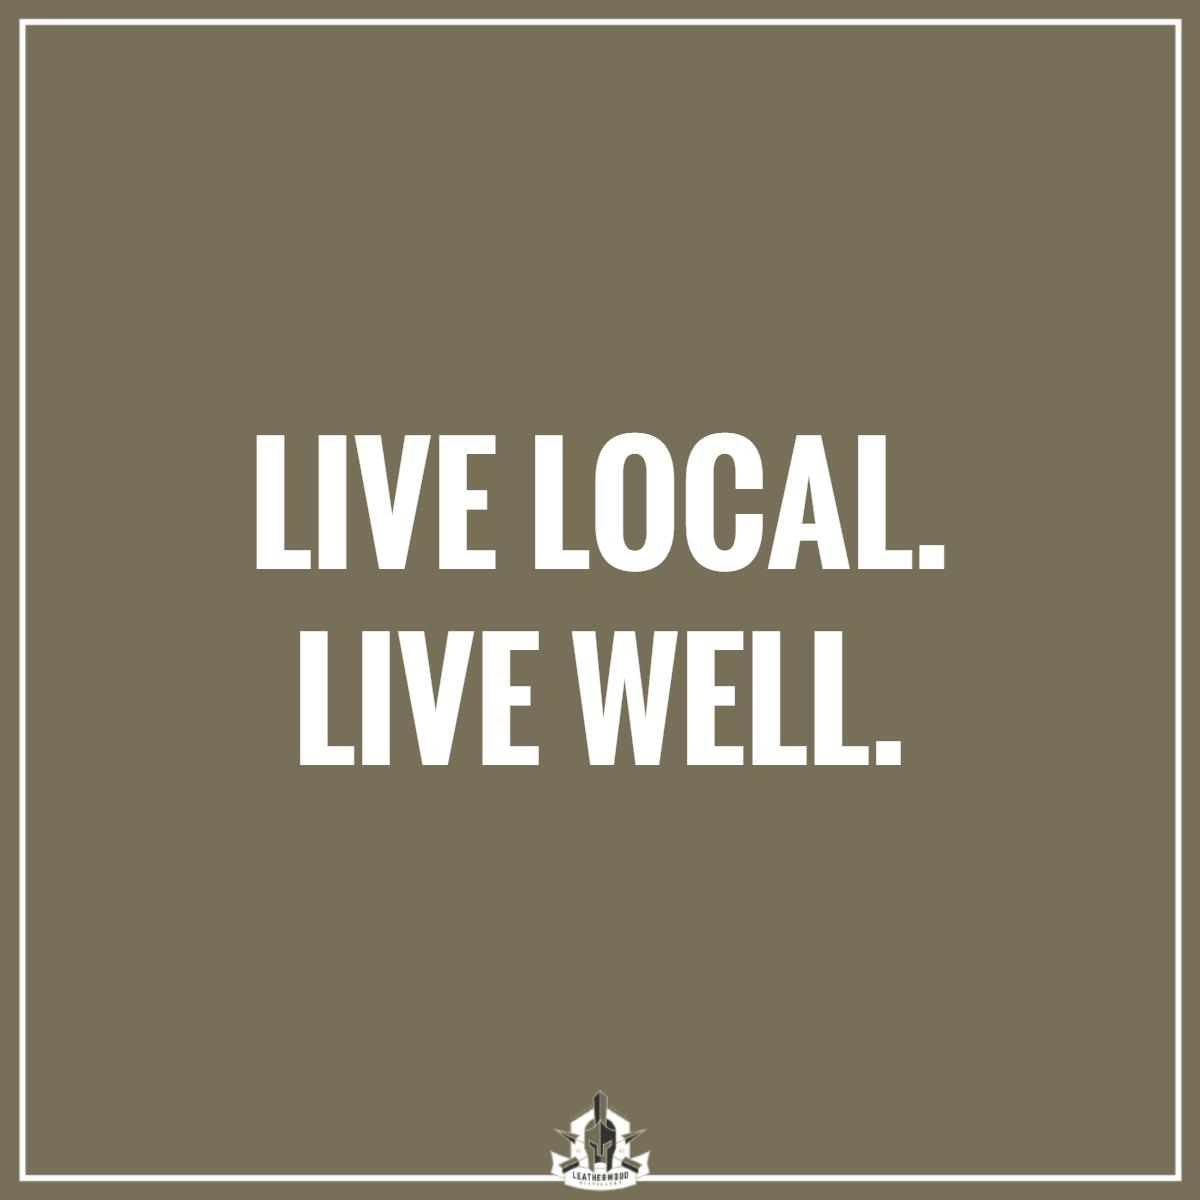 When you support your local businesses, you support your community!